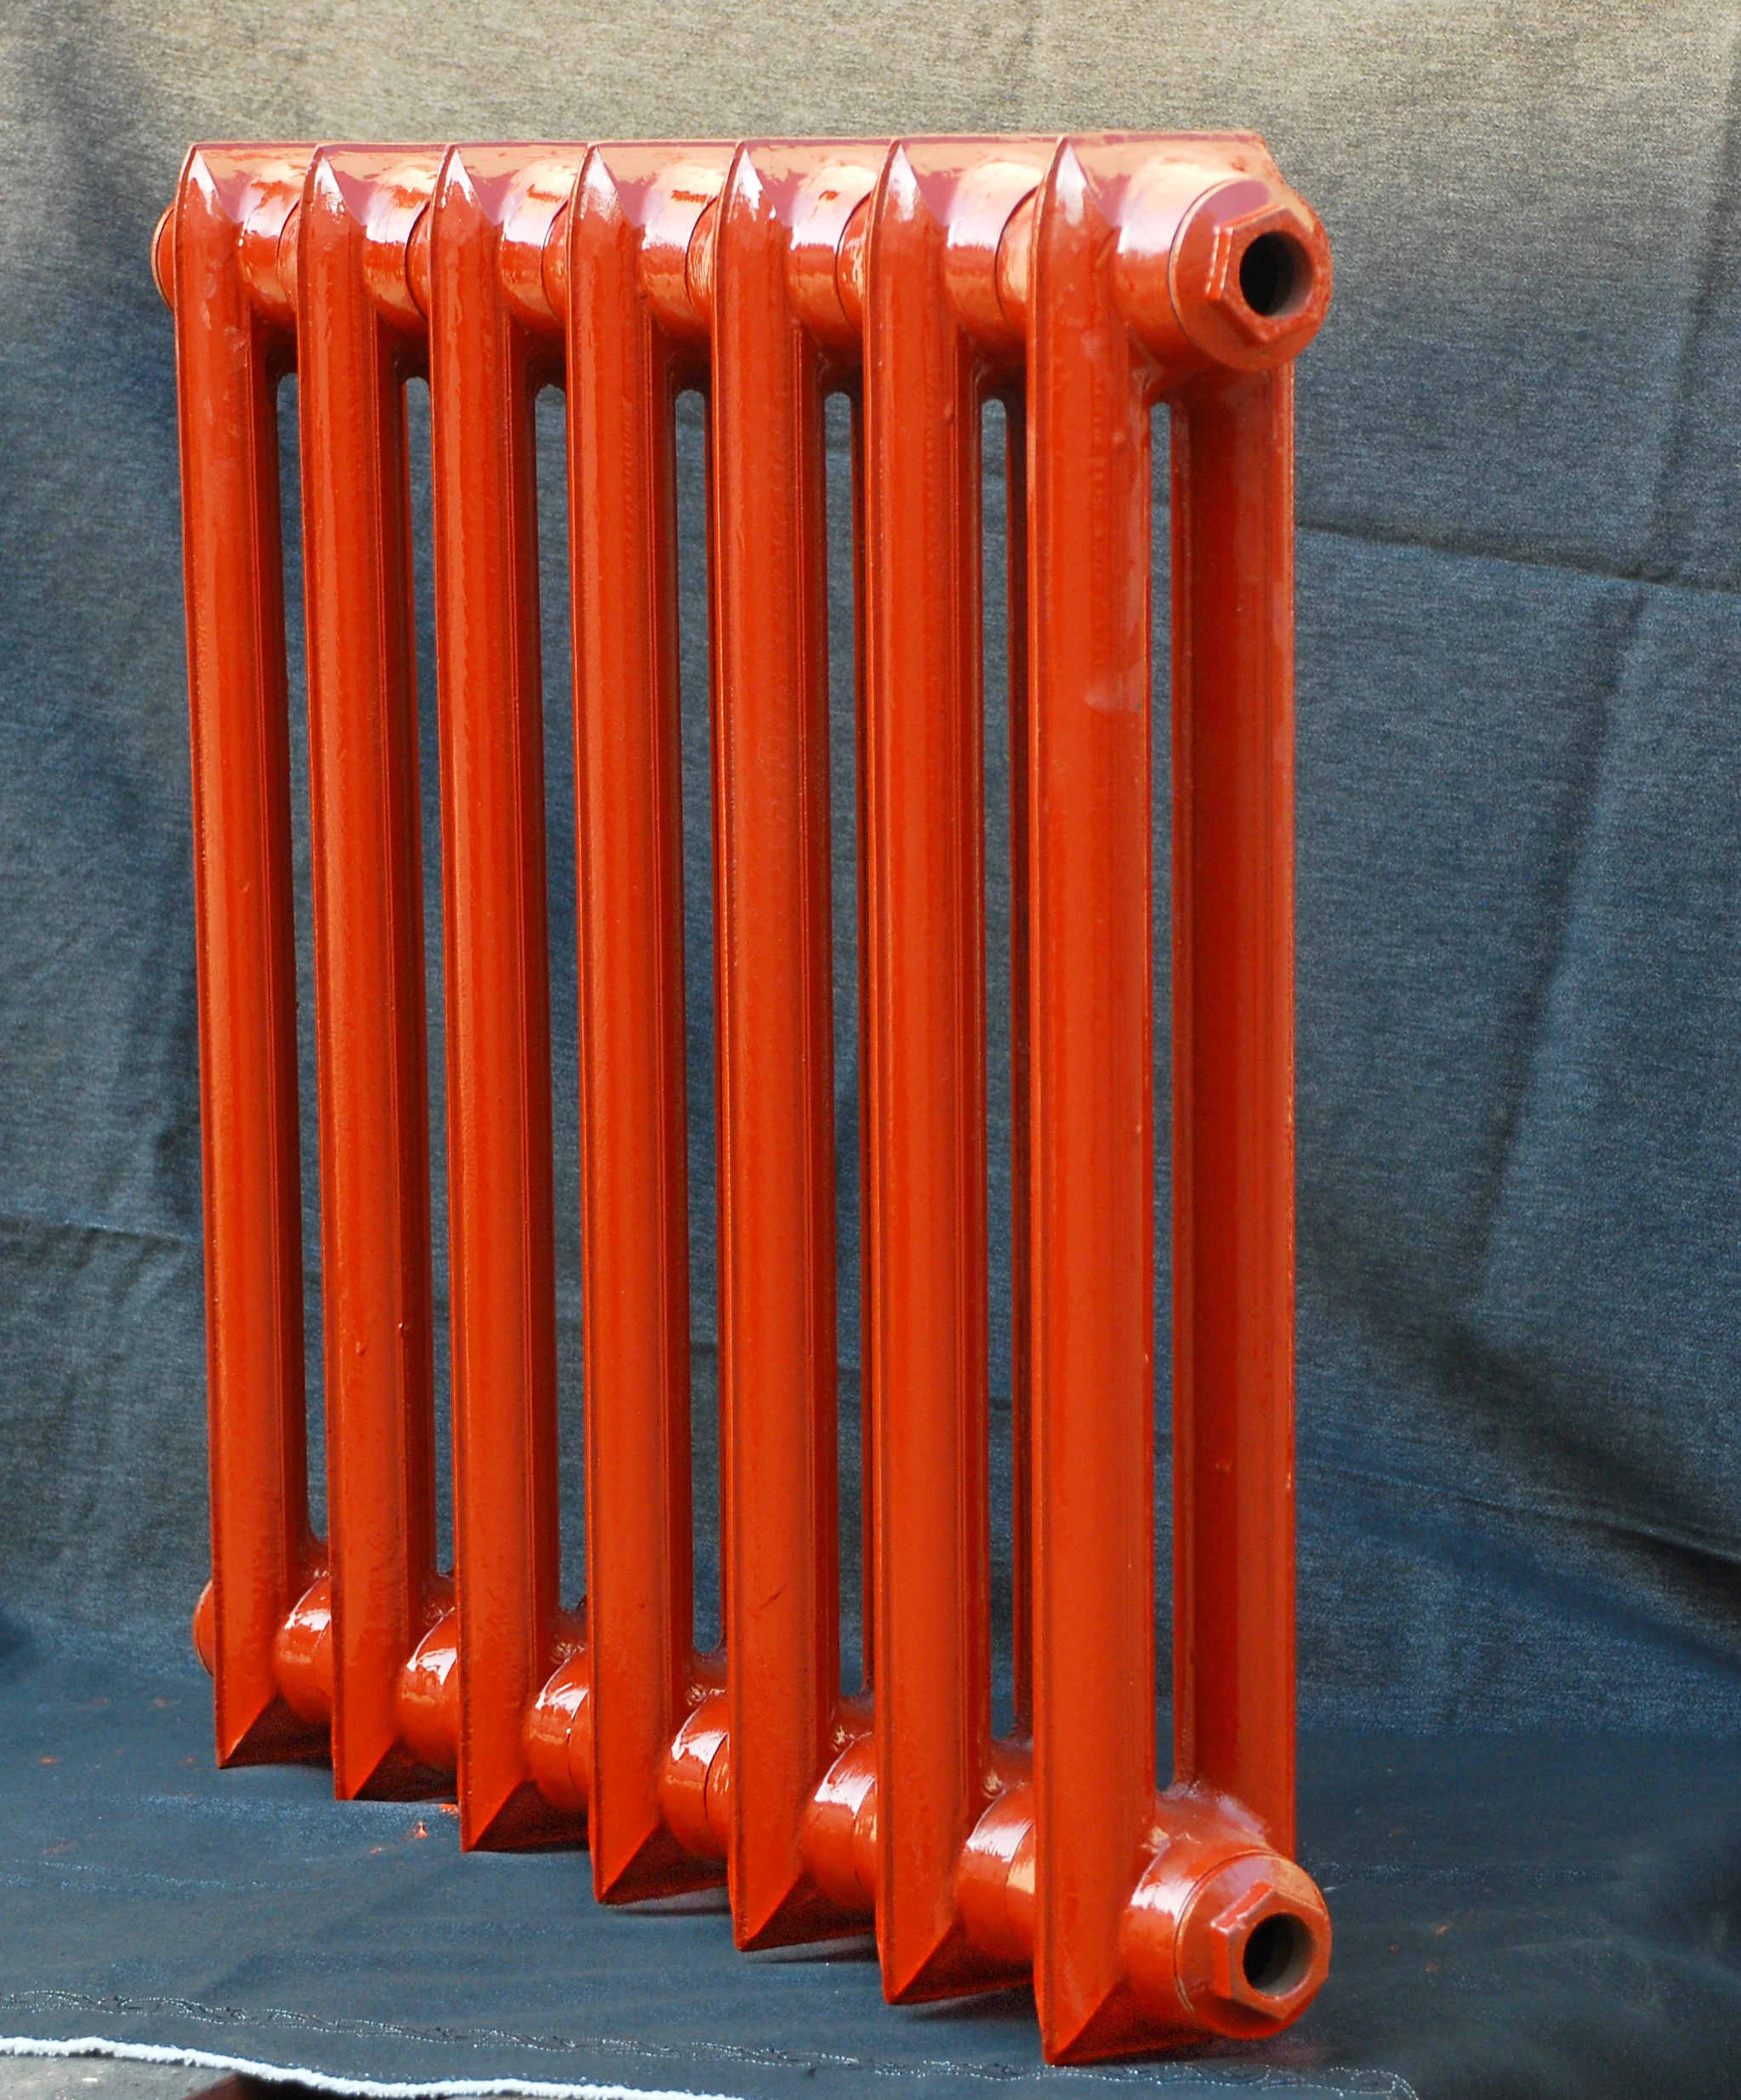 419 Tube Ci New Cast Iron Radiator Usd4 55 Piece The Validity Is One Month On Sale Buy New Cast Iron Radiators Cast Iron Radiator Custom Aluminum Radiator Product On Alibaba Com